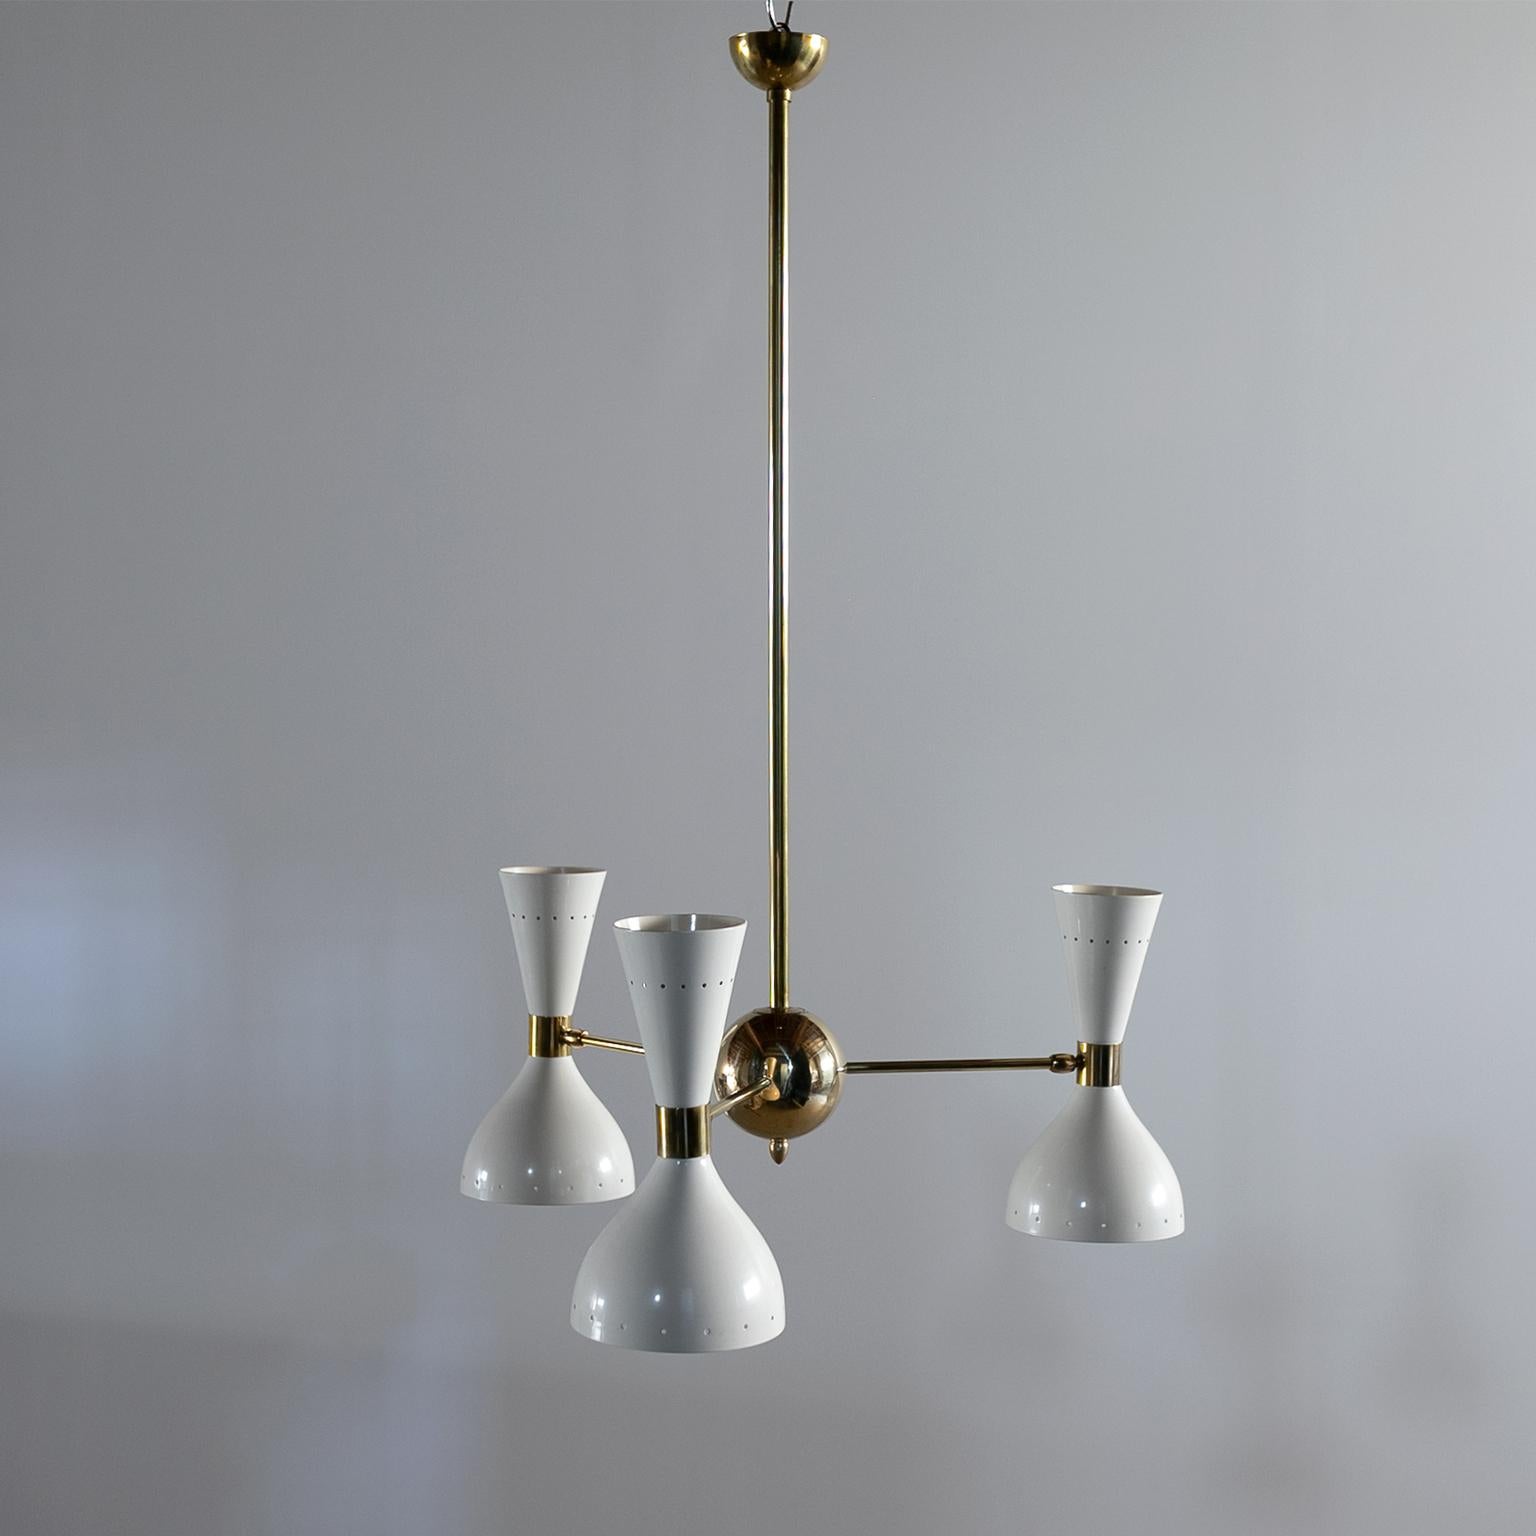 White chandelier by Stilnovo style
Six articulating lampshades which light upward and down.
   